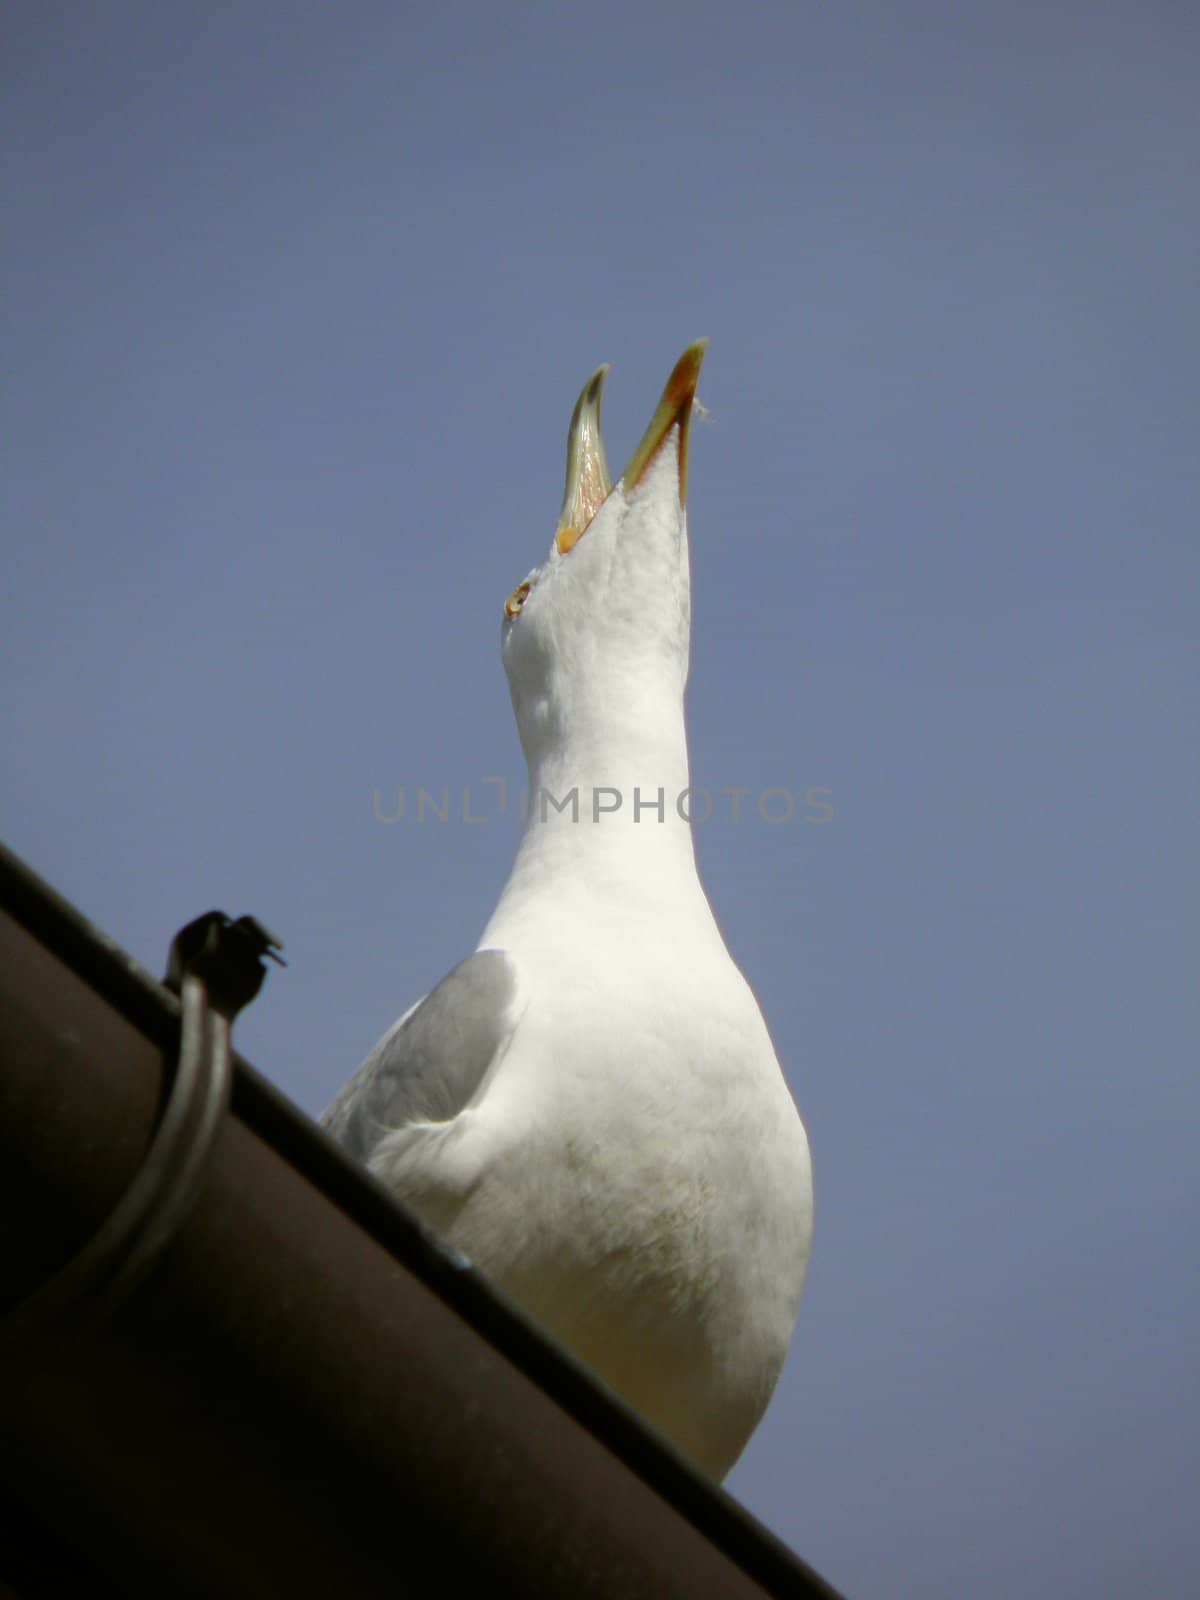 albatross standing on a roof and shouting aloud 